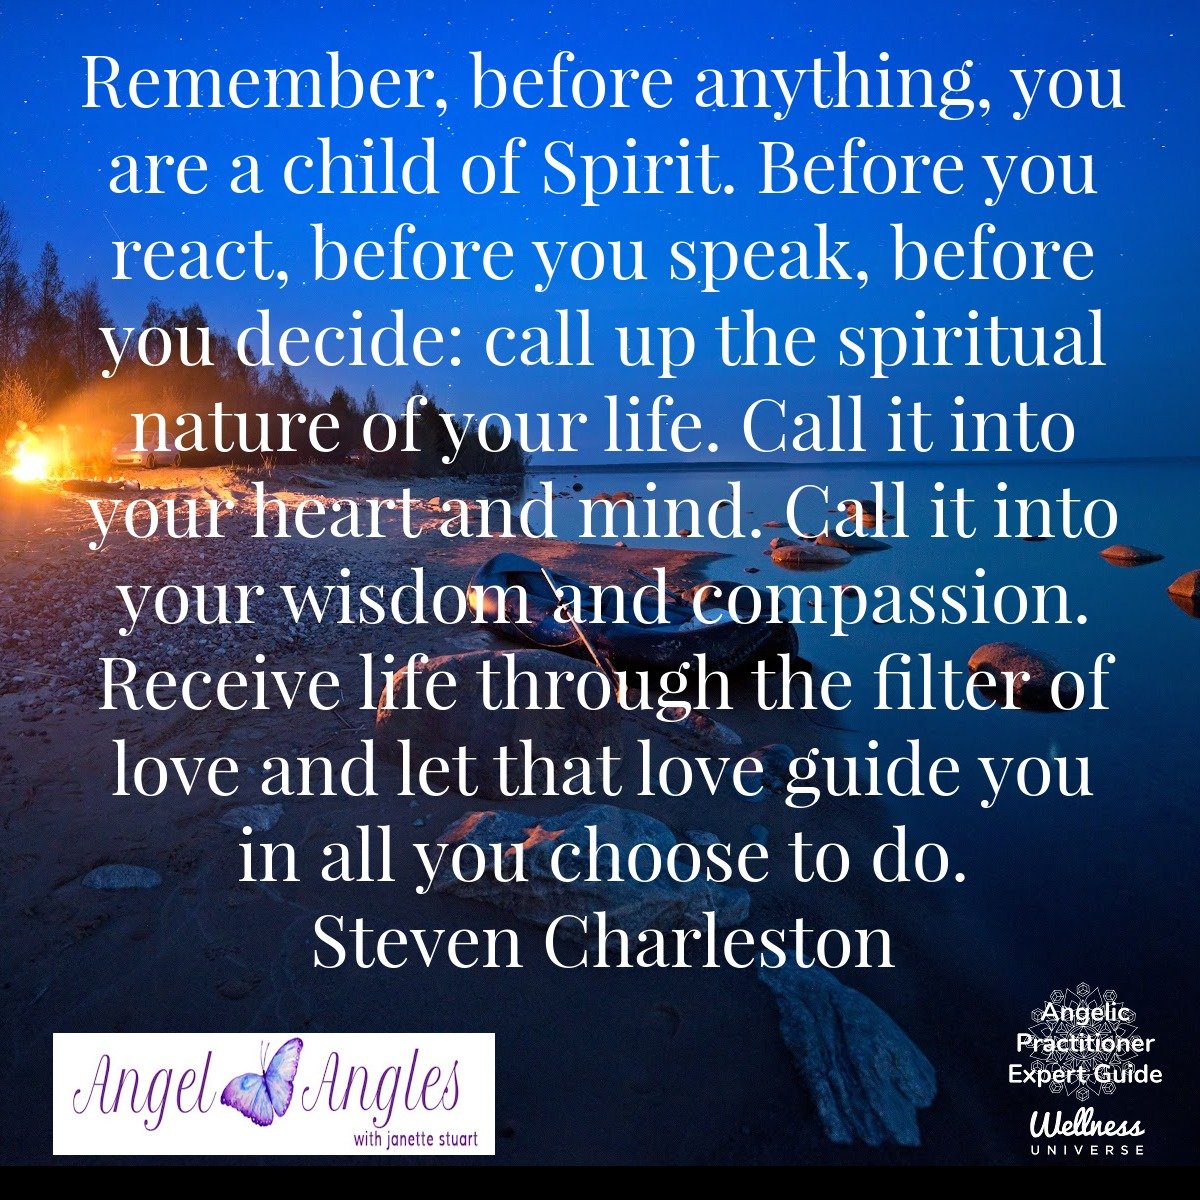 My word of the year is Reverence and I look for it each day. I see it in nature and in the written word often. Sharing it today with these wise words by Steven Charleston. 

Blessings of love, joy, and peace.
Love,
Janette 
.
.
#WUVIP #WUWorldChanger